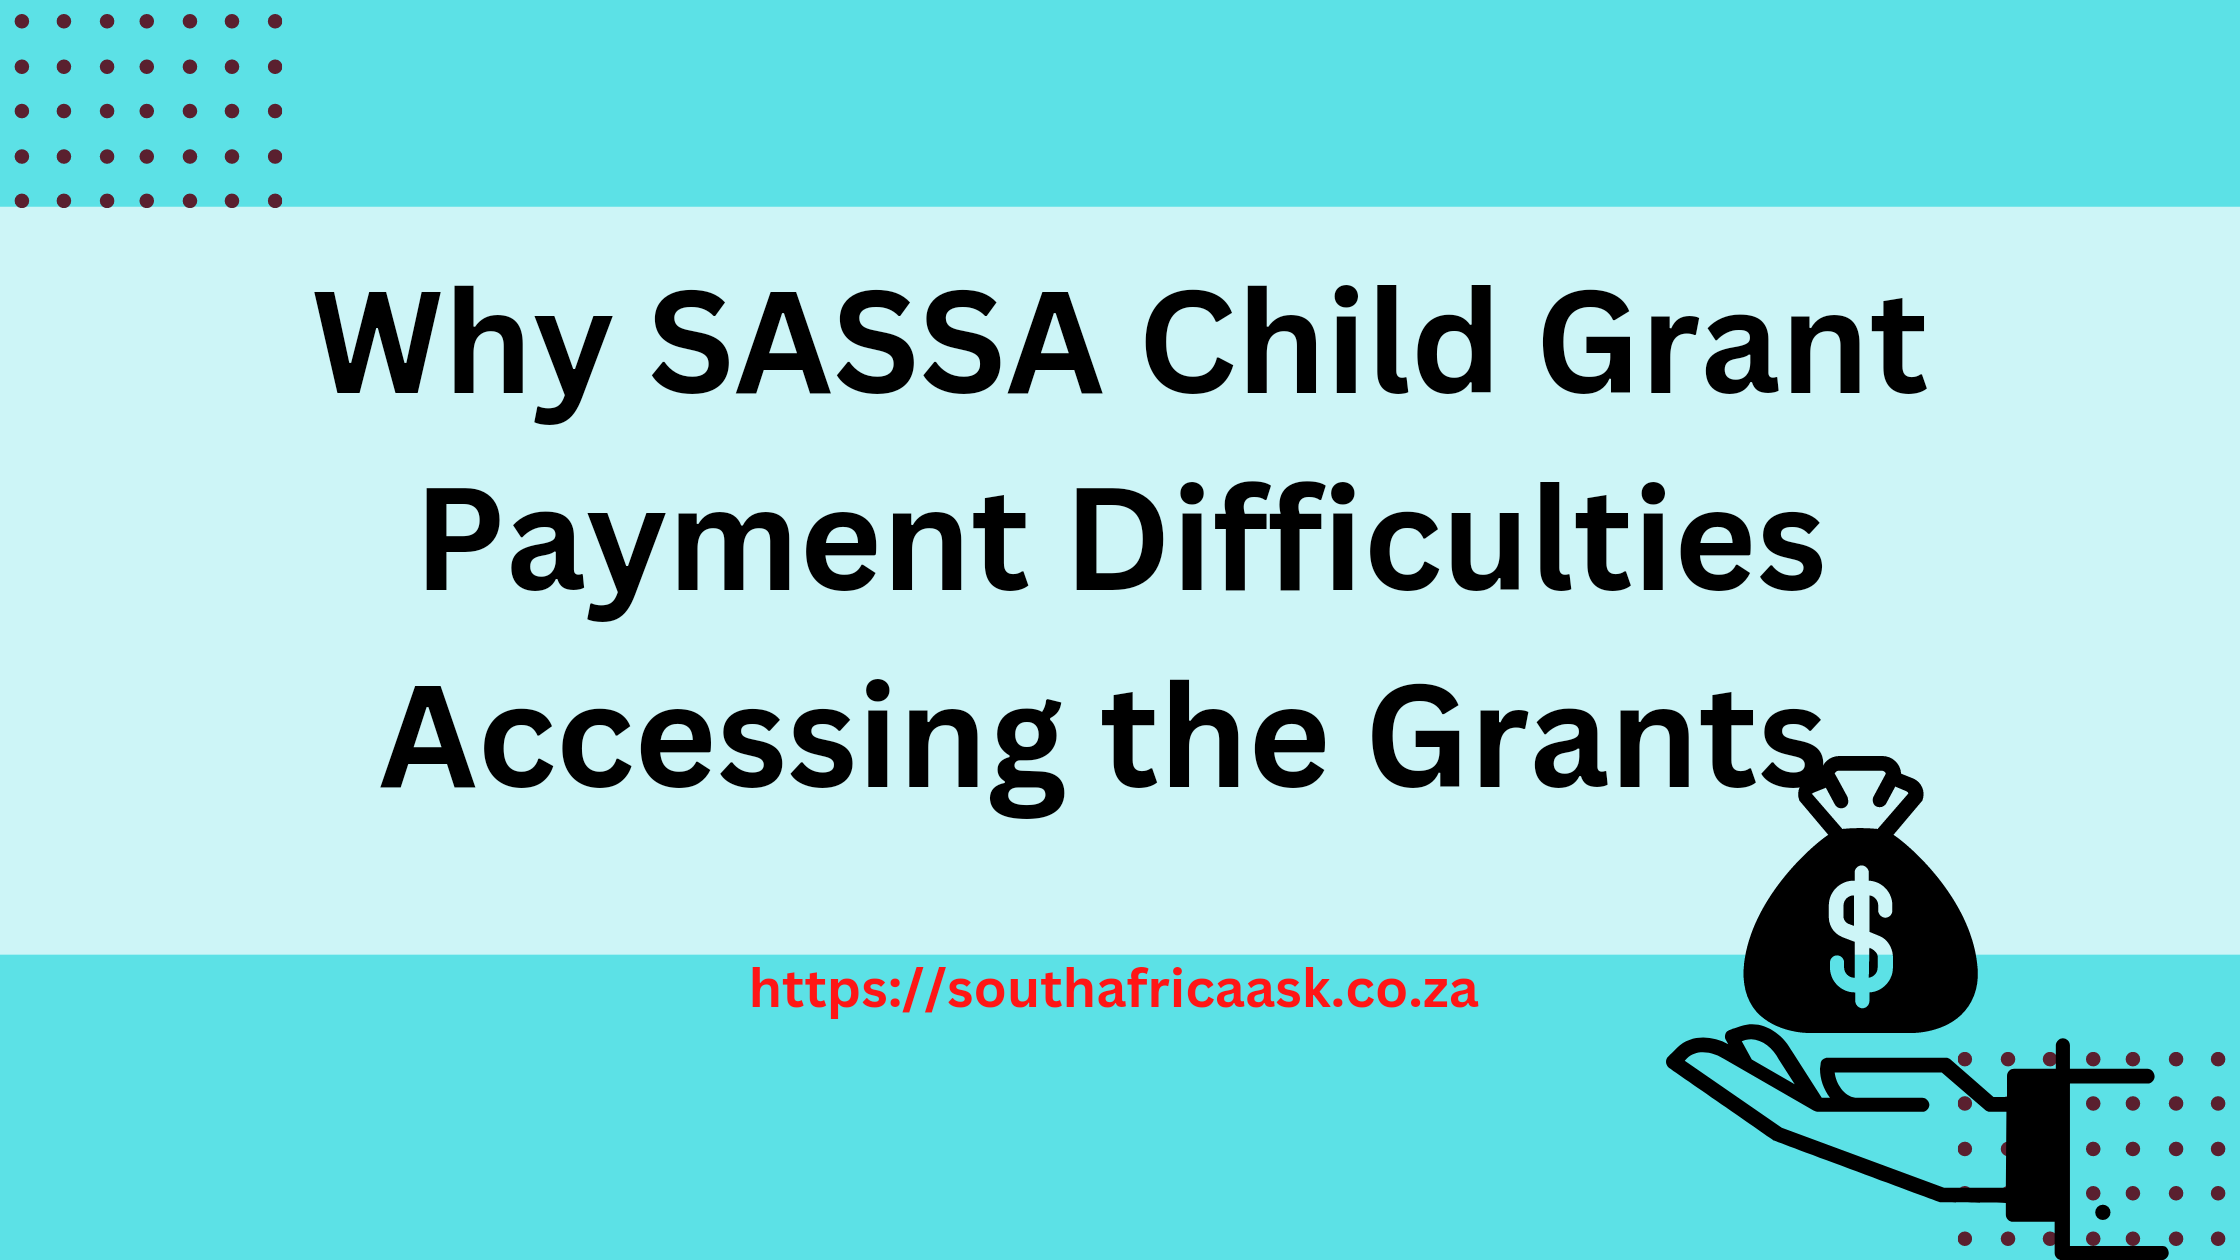 Why SASSA Recipients Experiencing Payment Difficulties Accessing the Grants